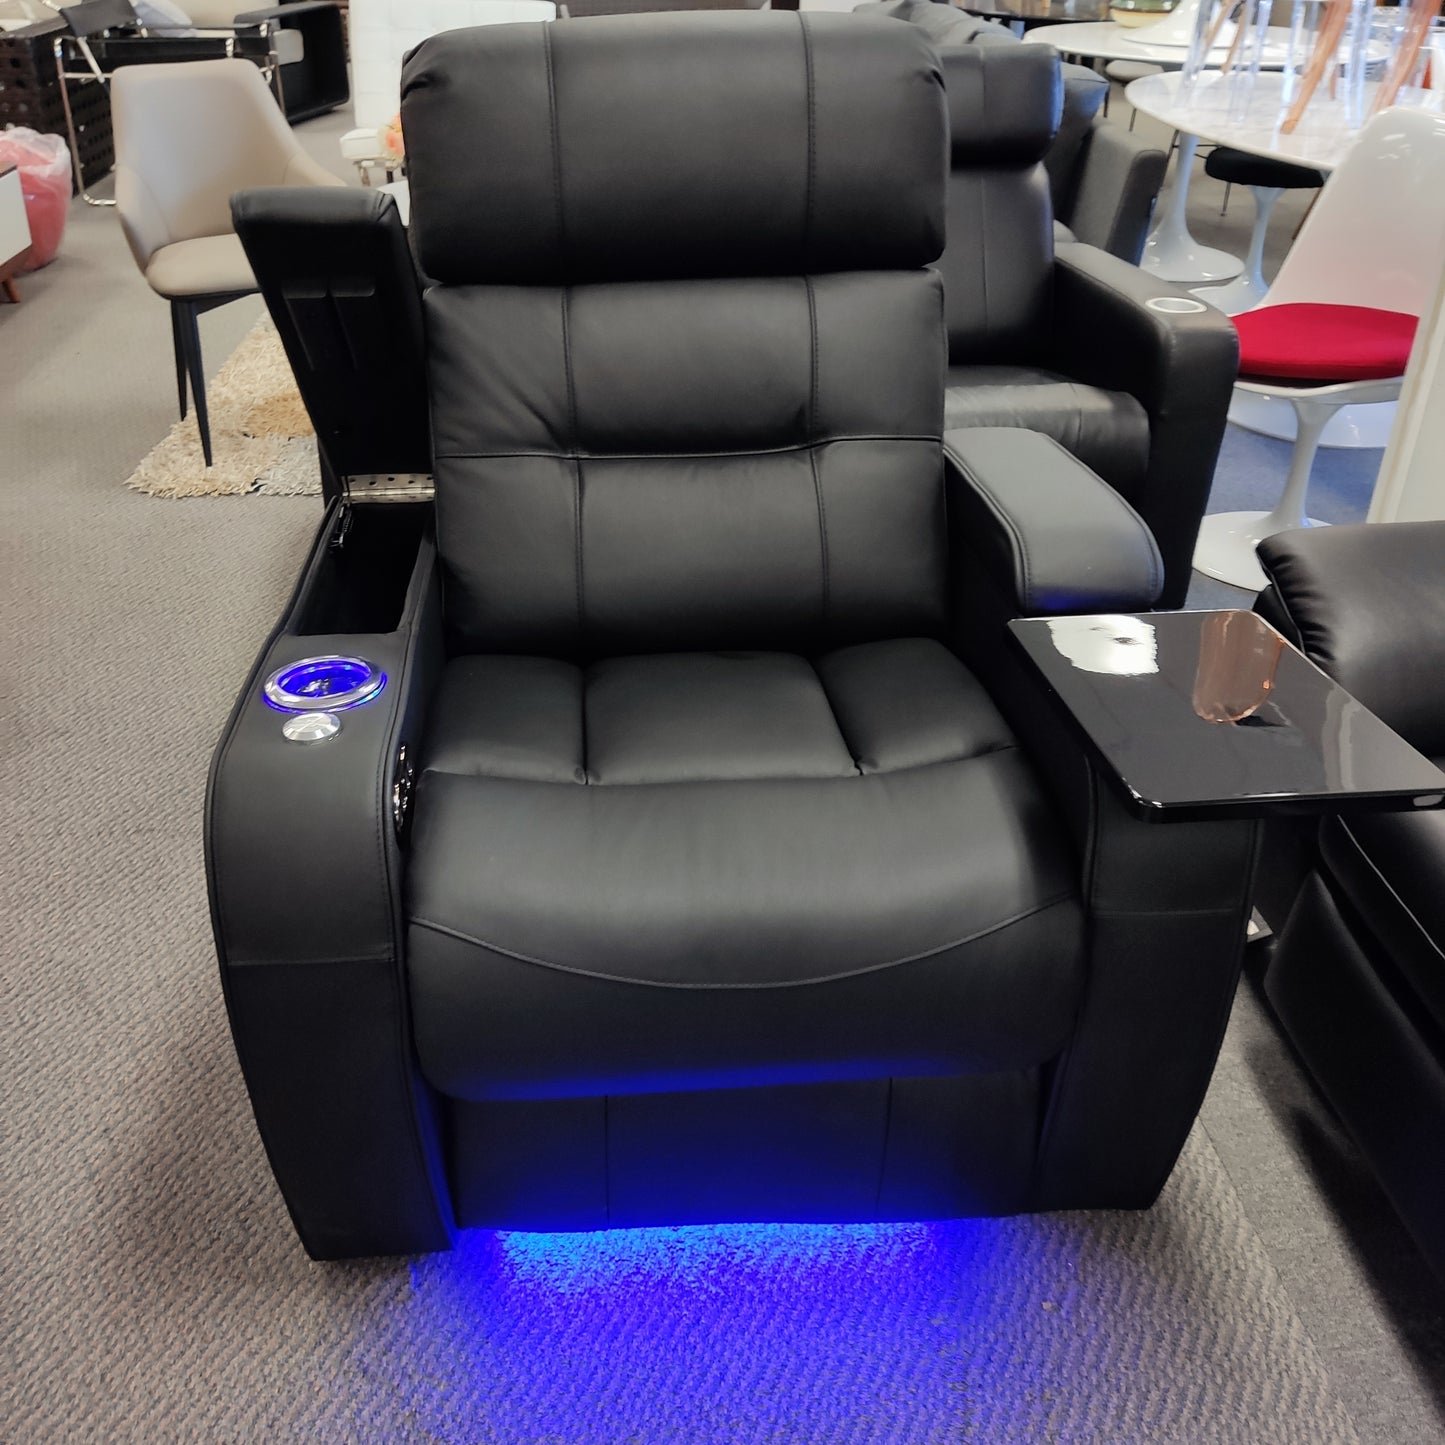 Multufunctional Electric Genuine Leather Home Theatre Seating  #1009B available now